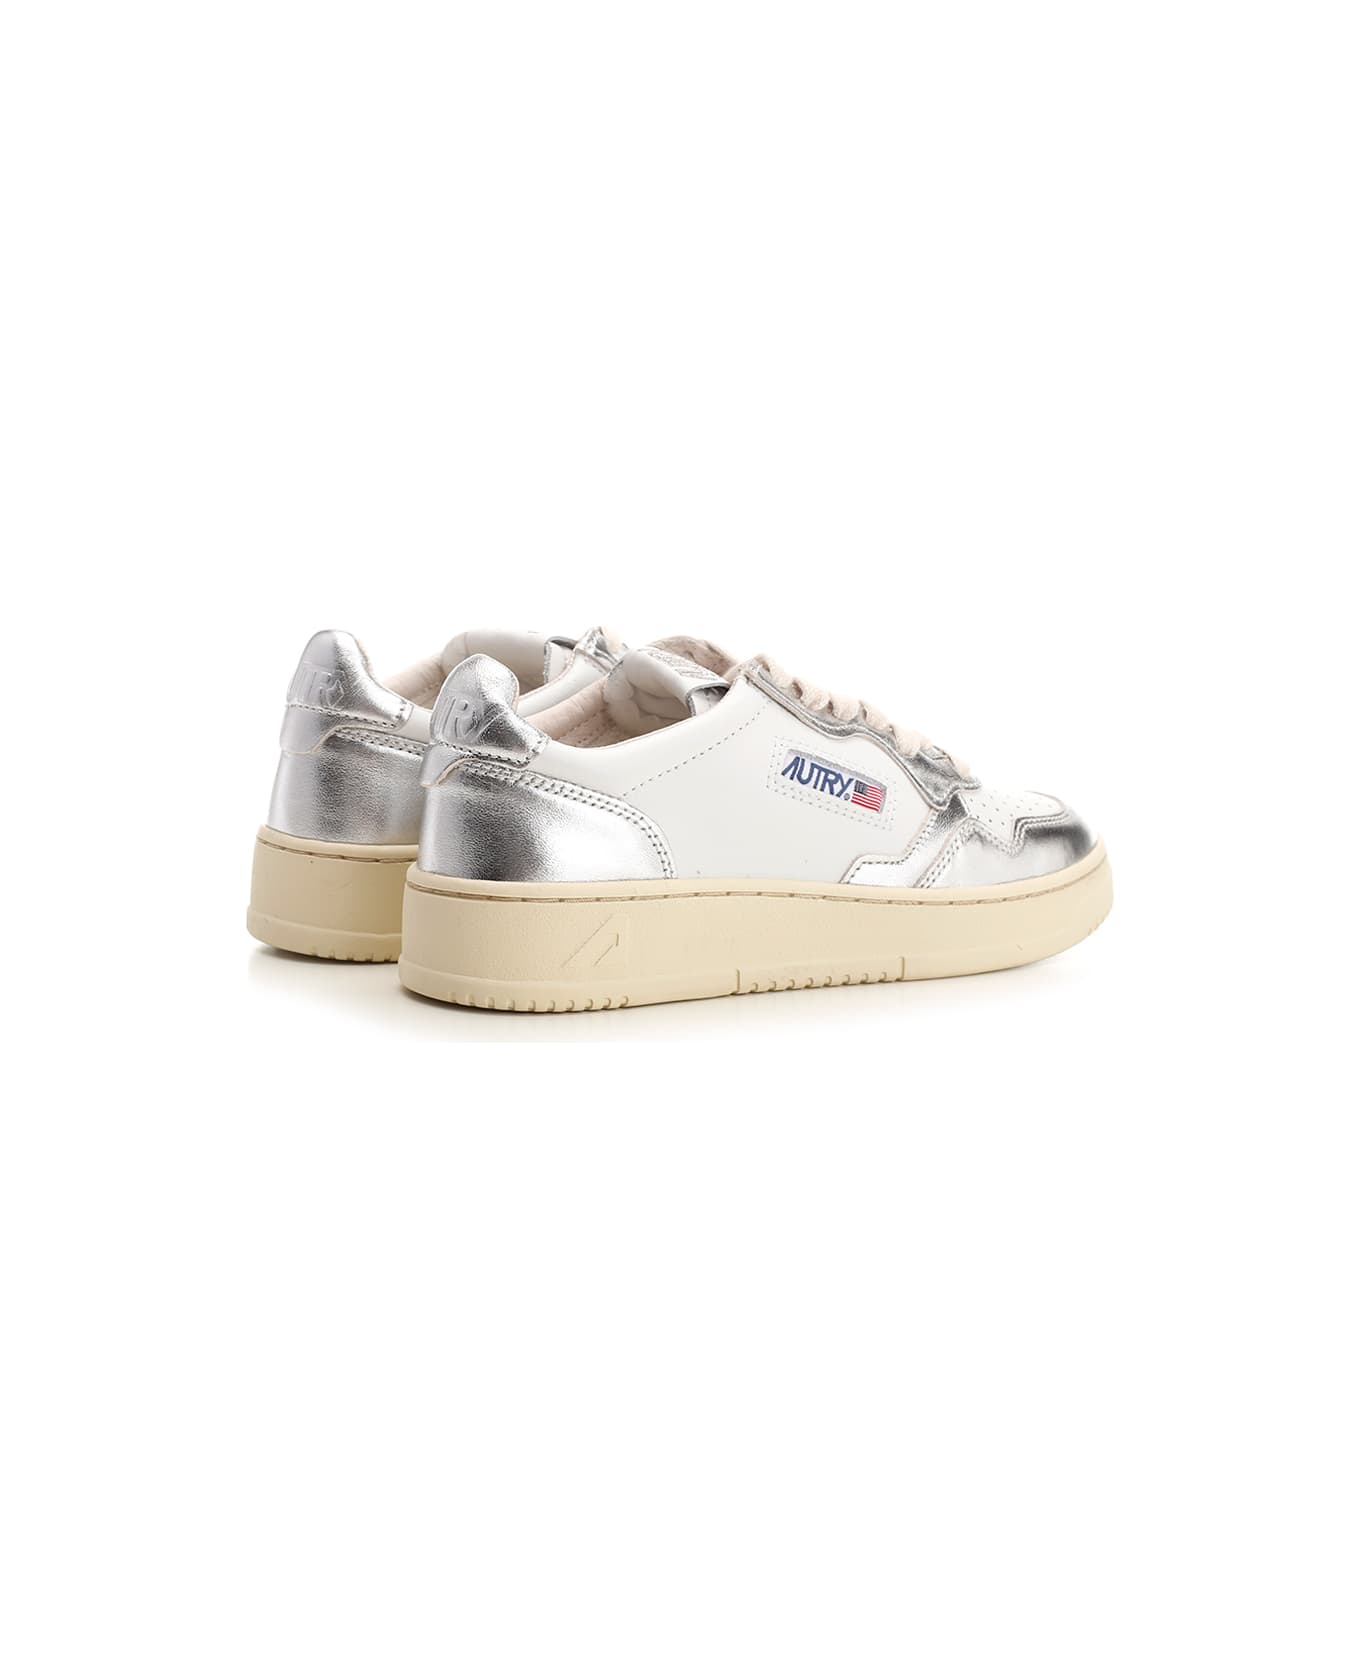 Autry 'medalist' Sneakers With Silver Inserts - Wht/silver